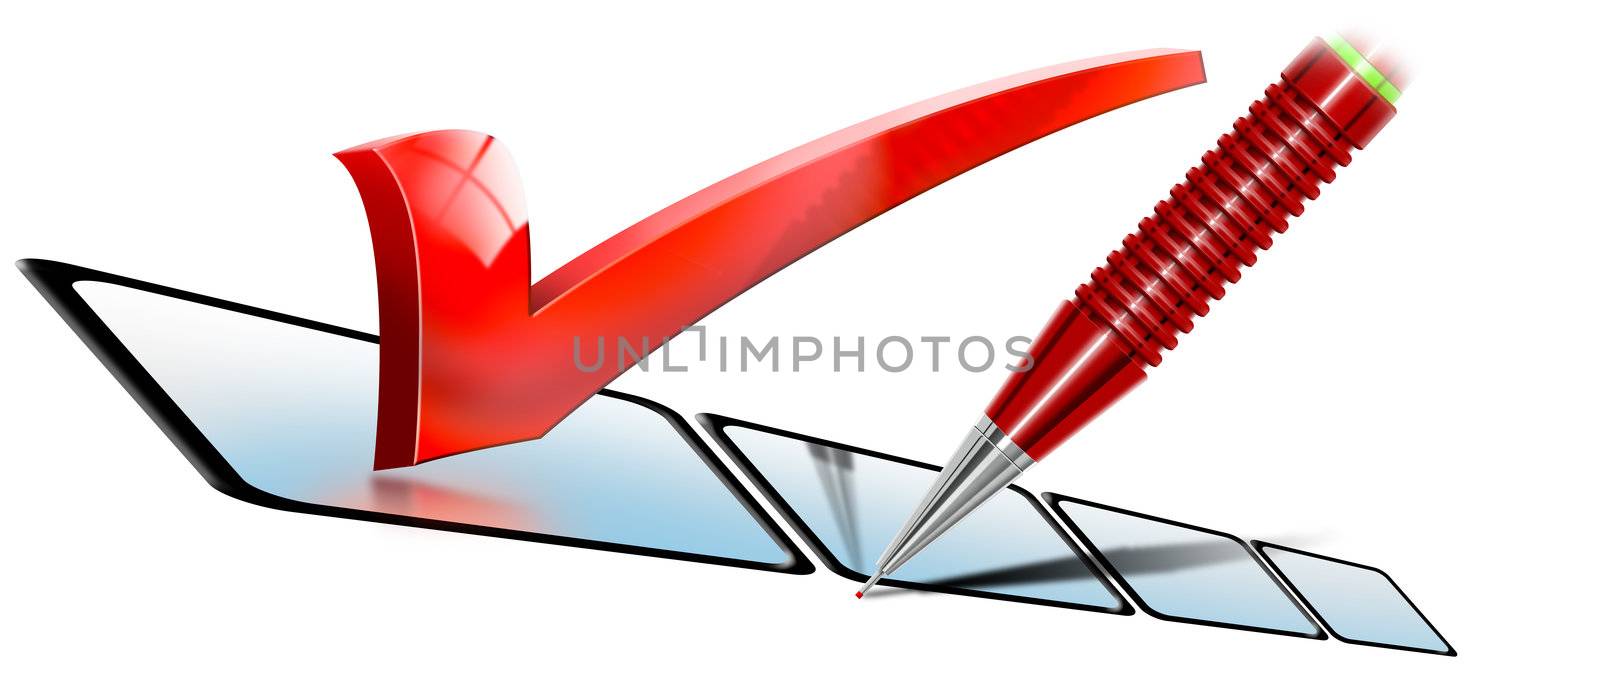 Illustration with red pencil and selection decision with list